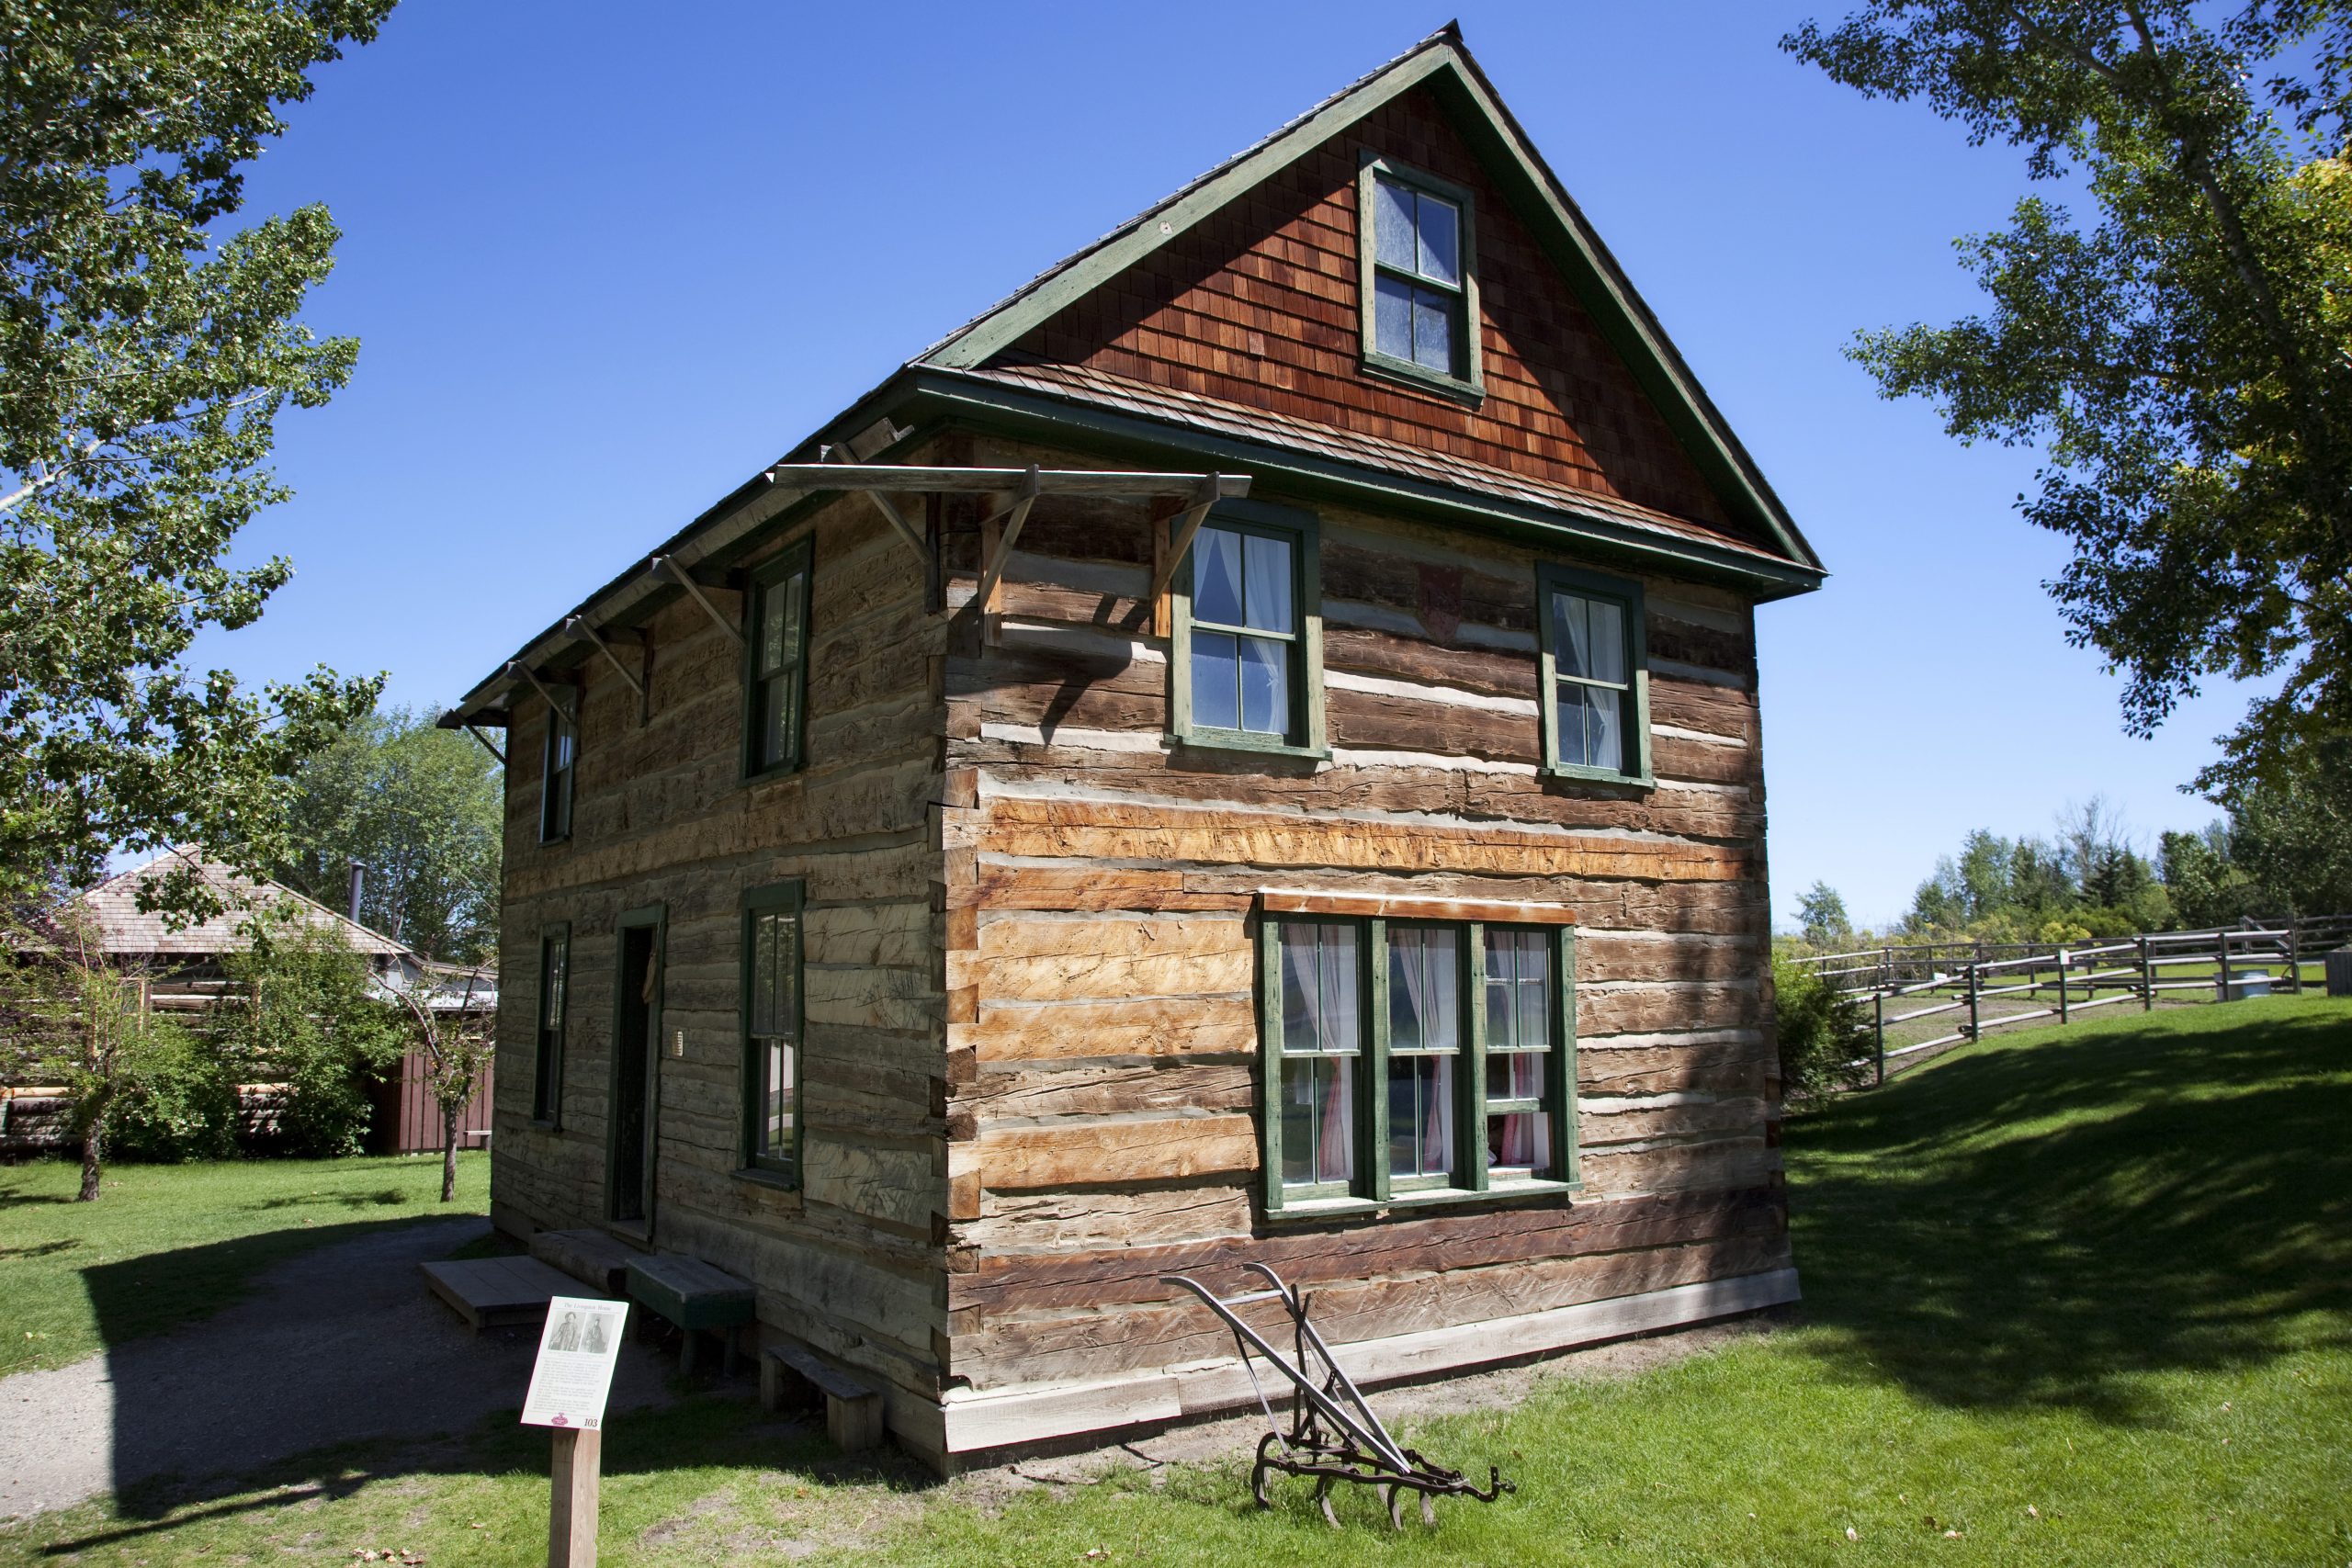 Livingston House and Barn, located at Heritage Park